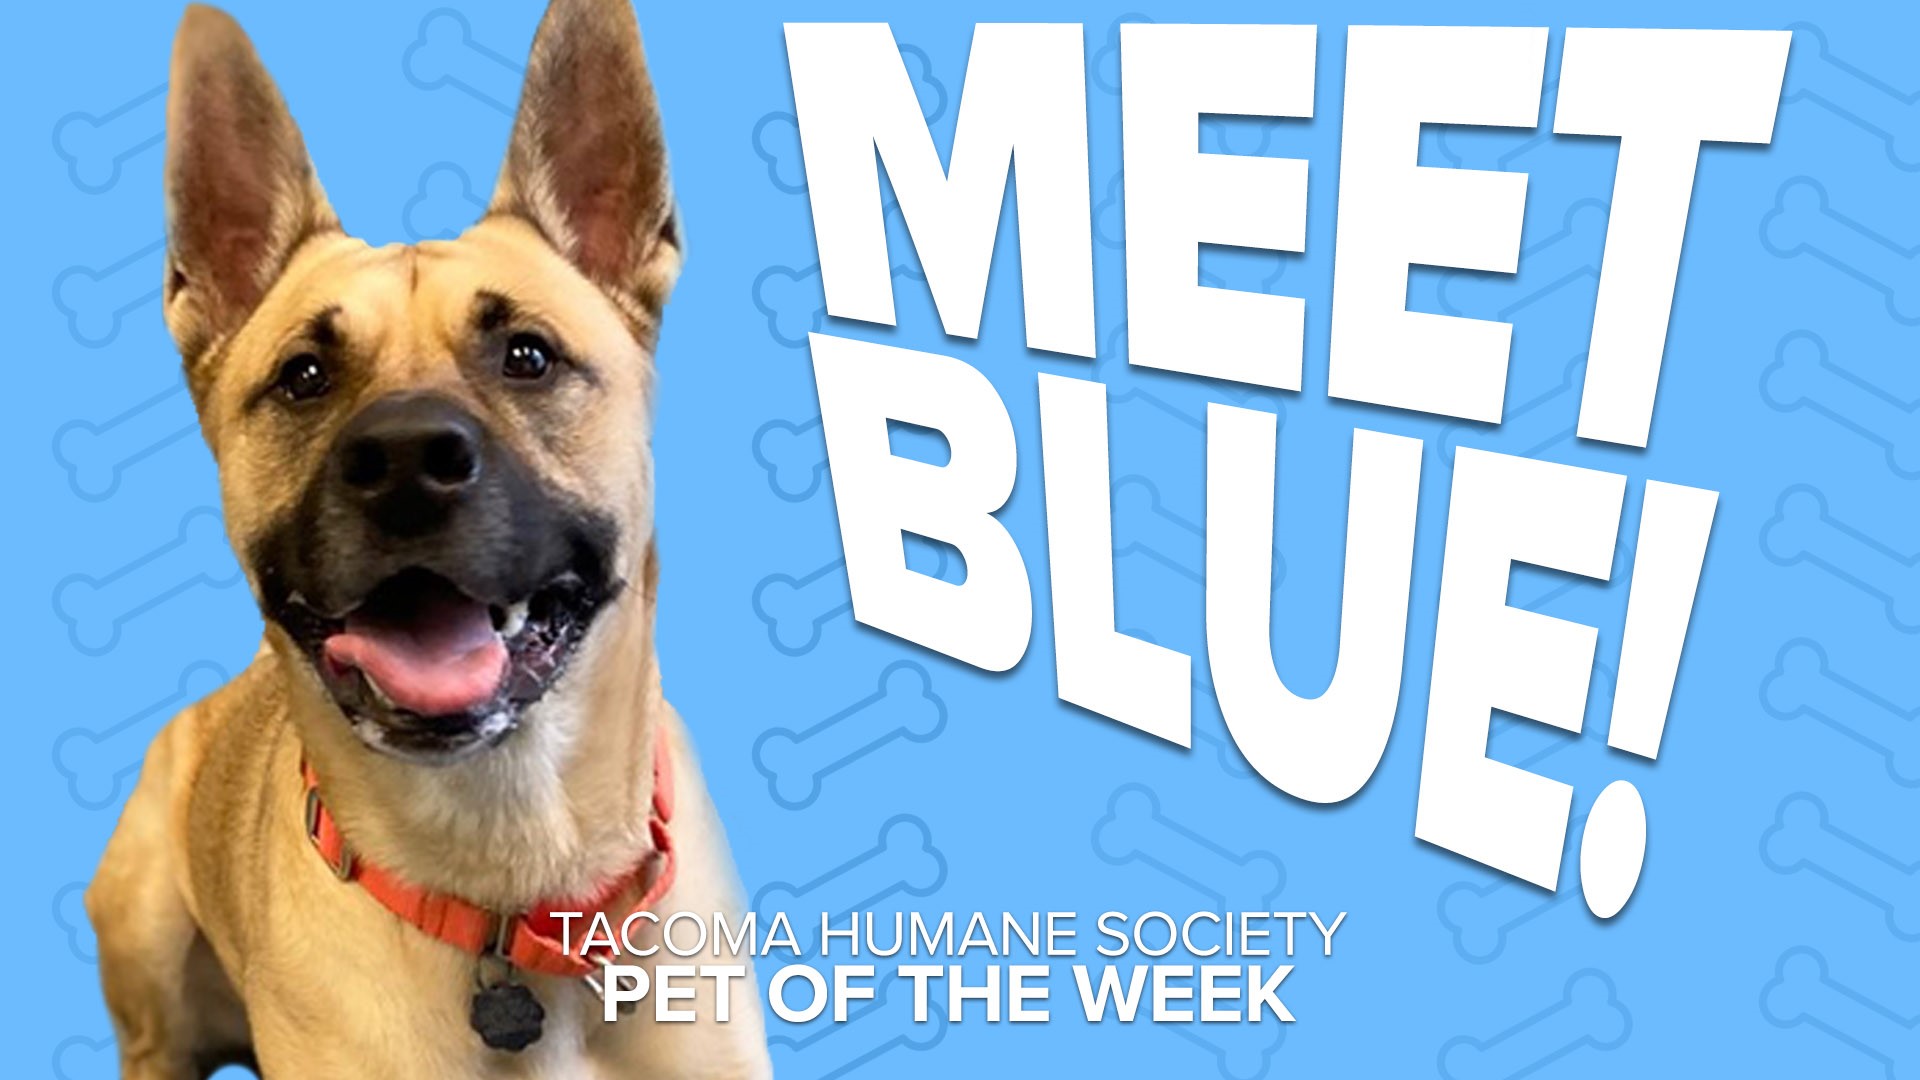 Blue is a loving, energetic, 3-year-old Akita mix